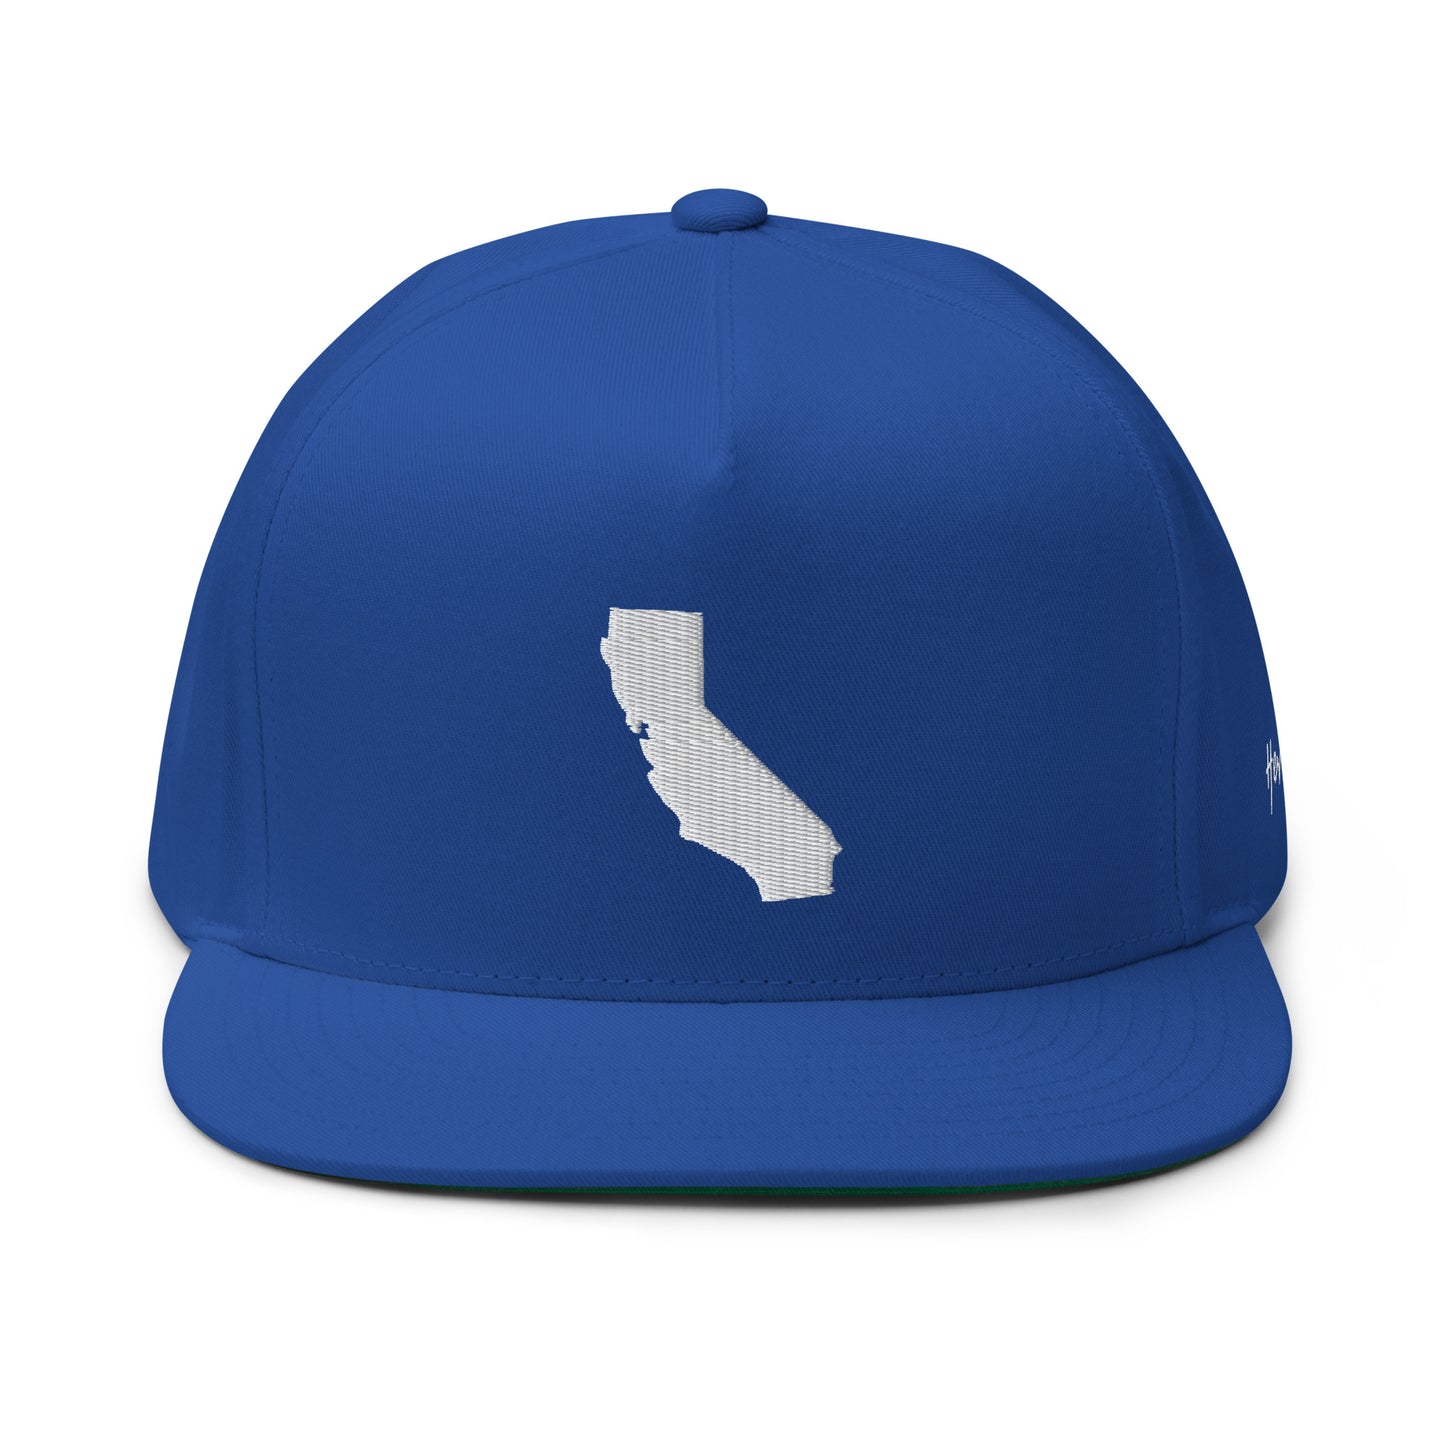 California State Silhouette 5 Panel A-Frame Snapback Hat